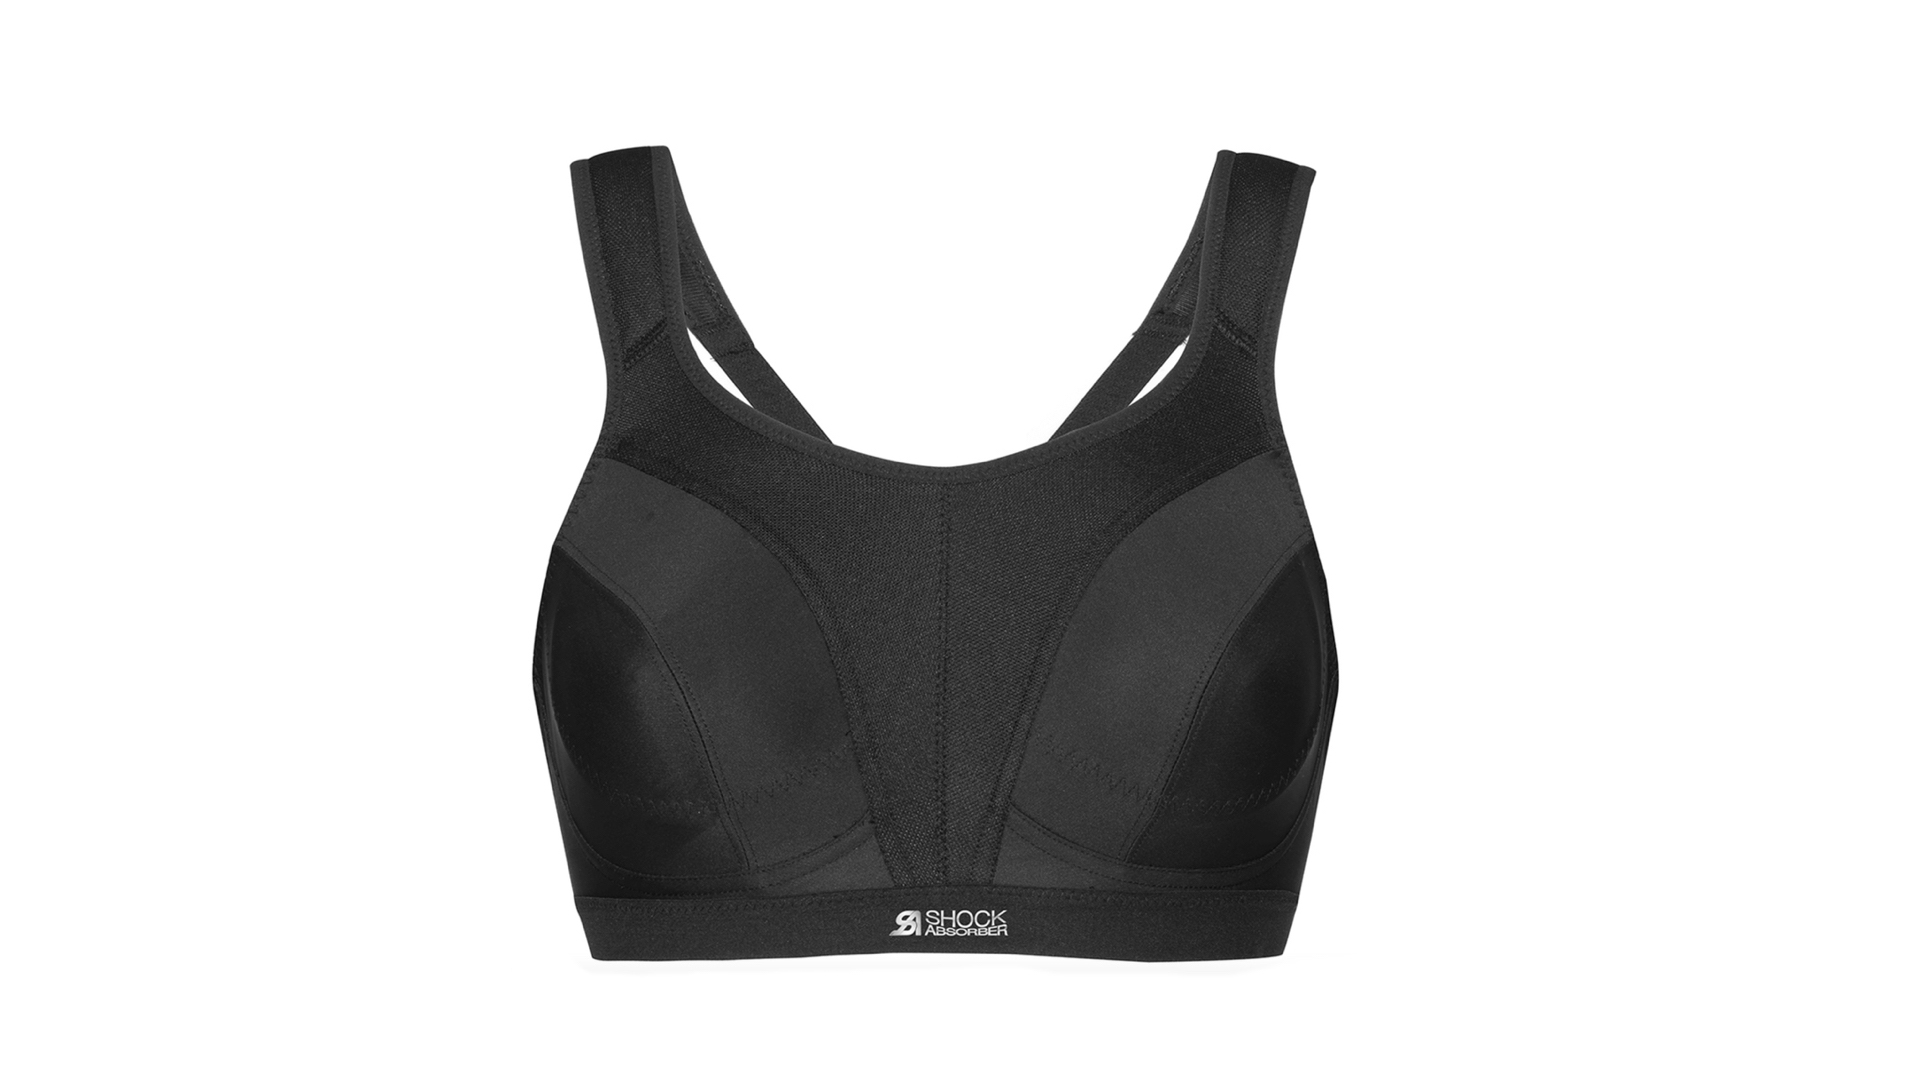 What Shock Absorber Sports Bra Is Best For You? - UK Lingerie Blog